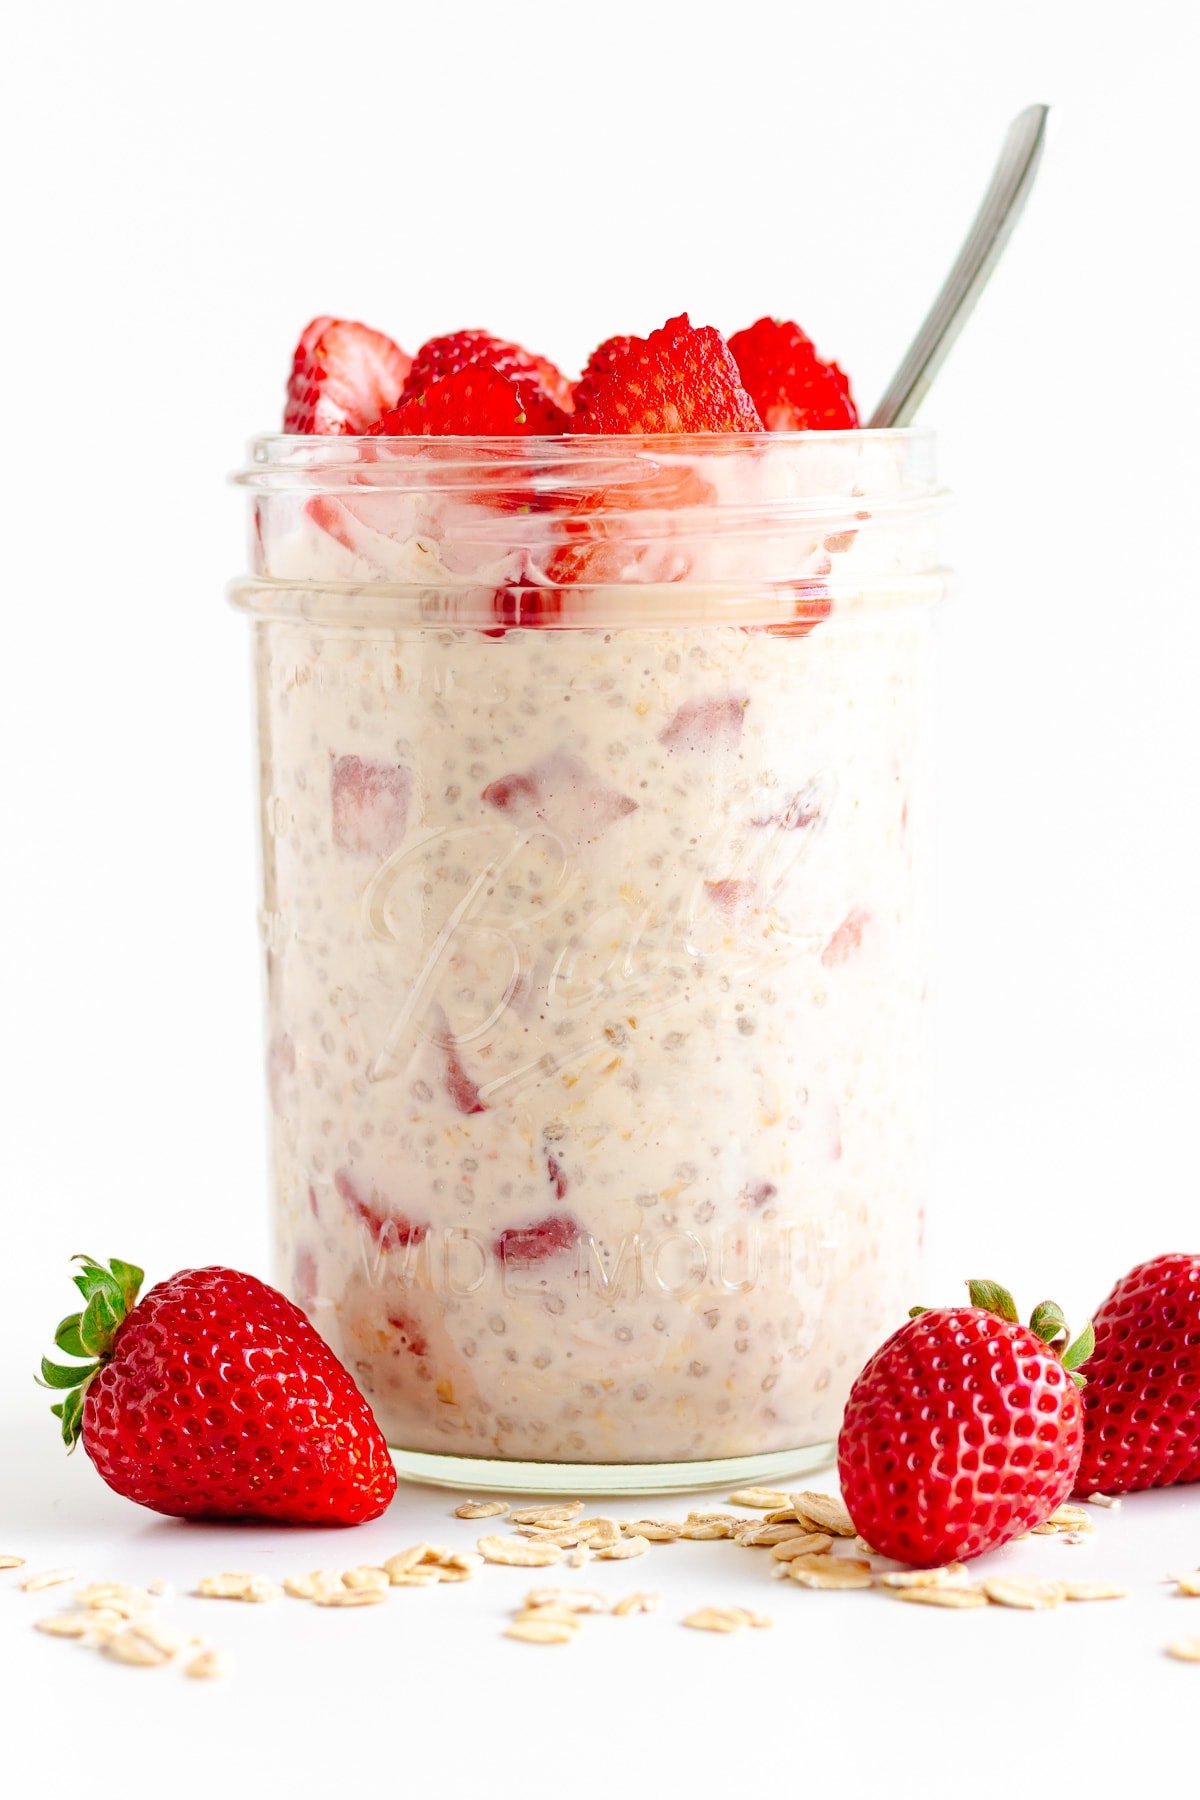 Mason jar filled with strawberry overnight oats and topping with fresh strawberry slices.